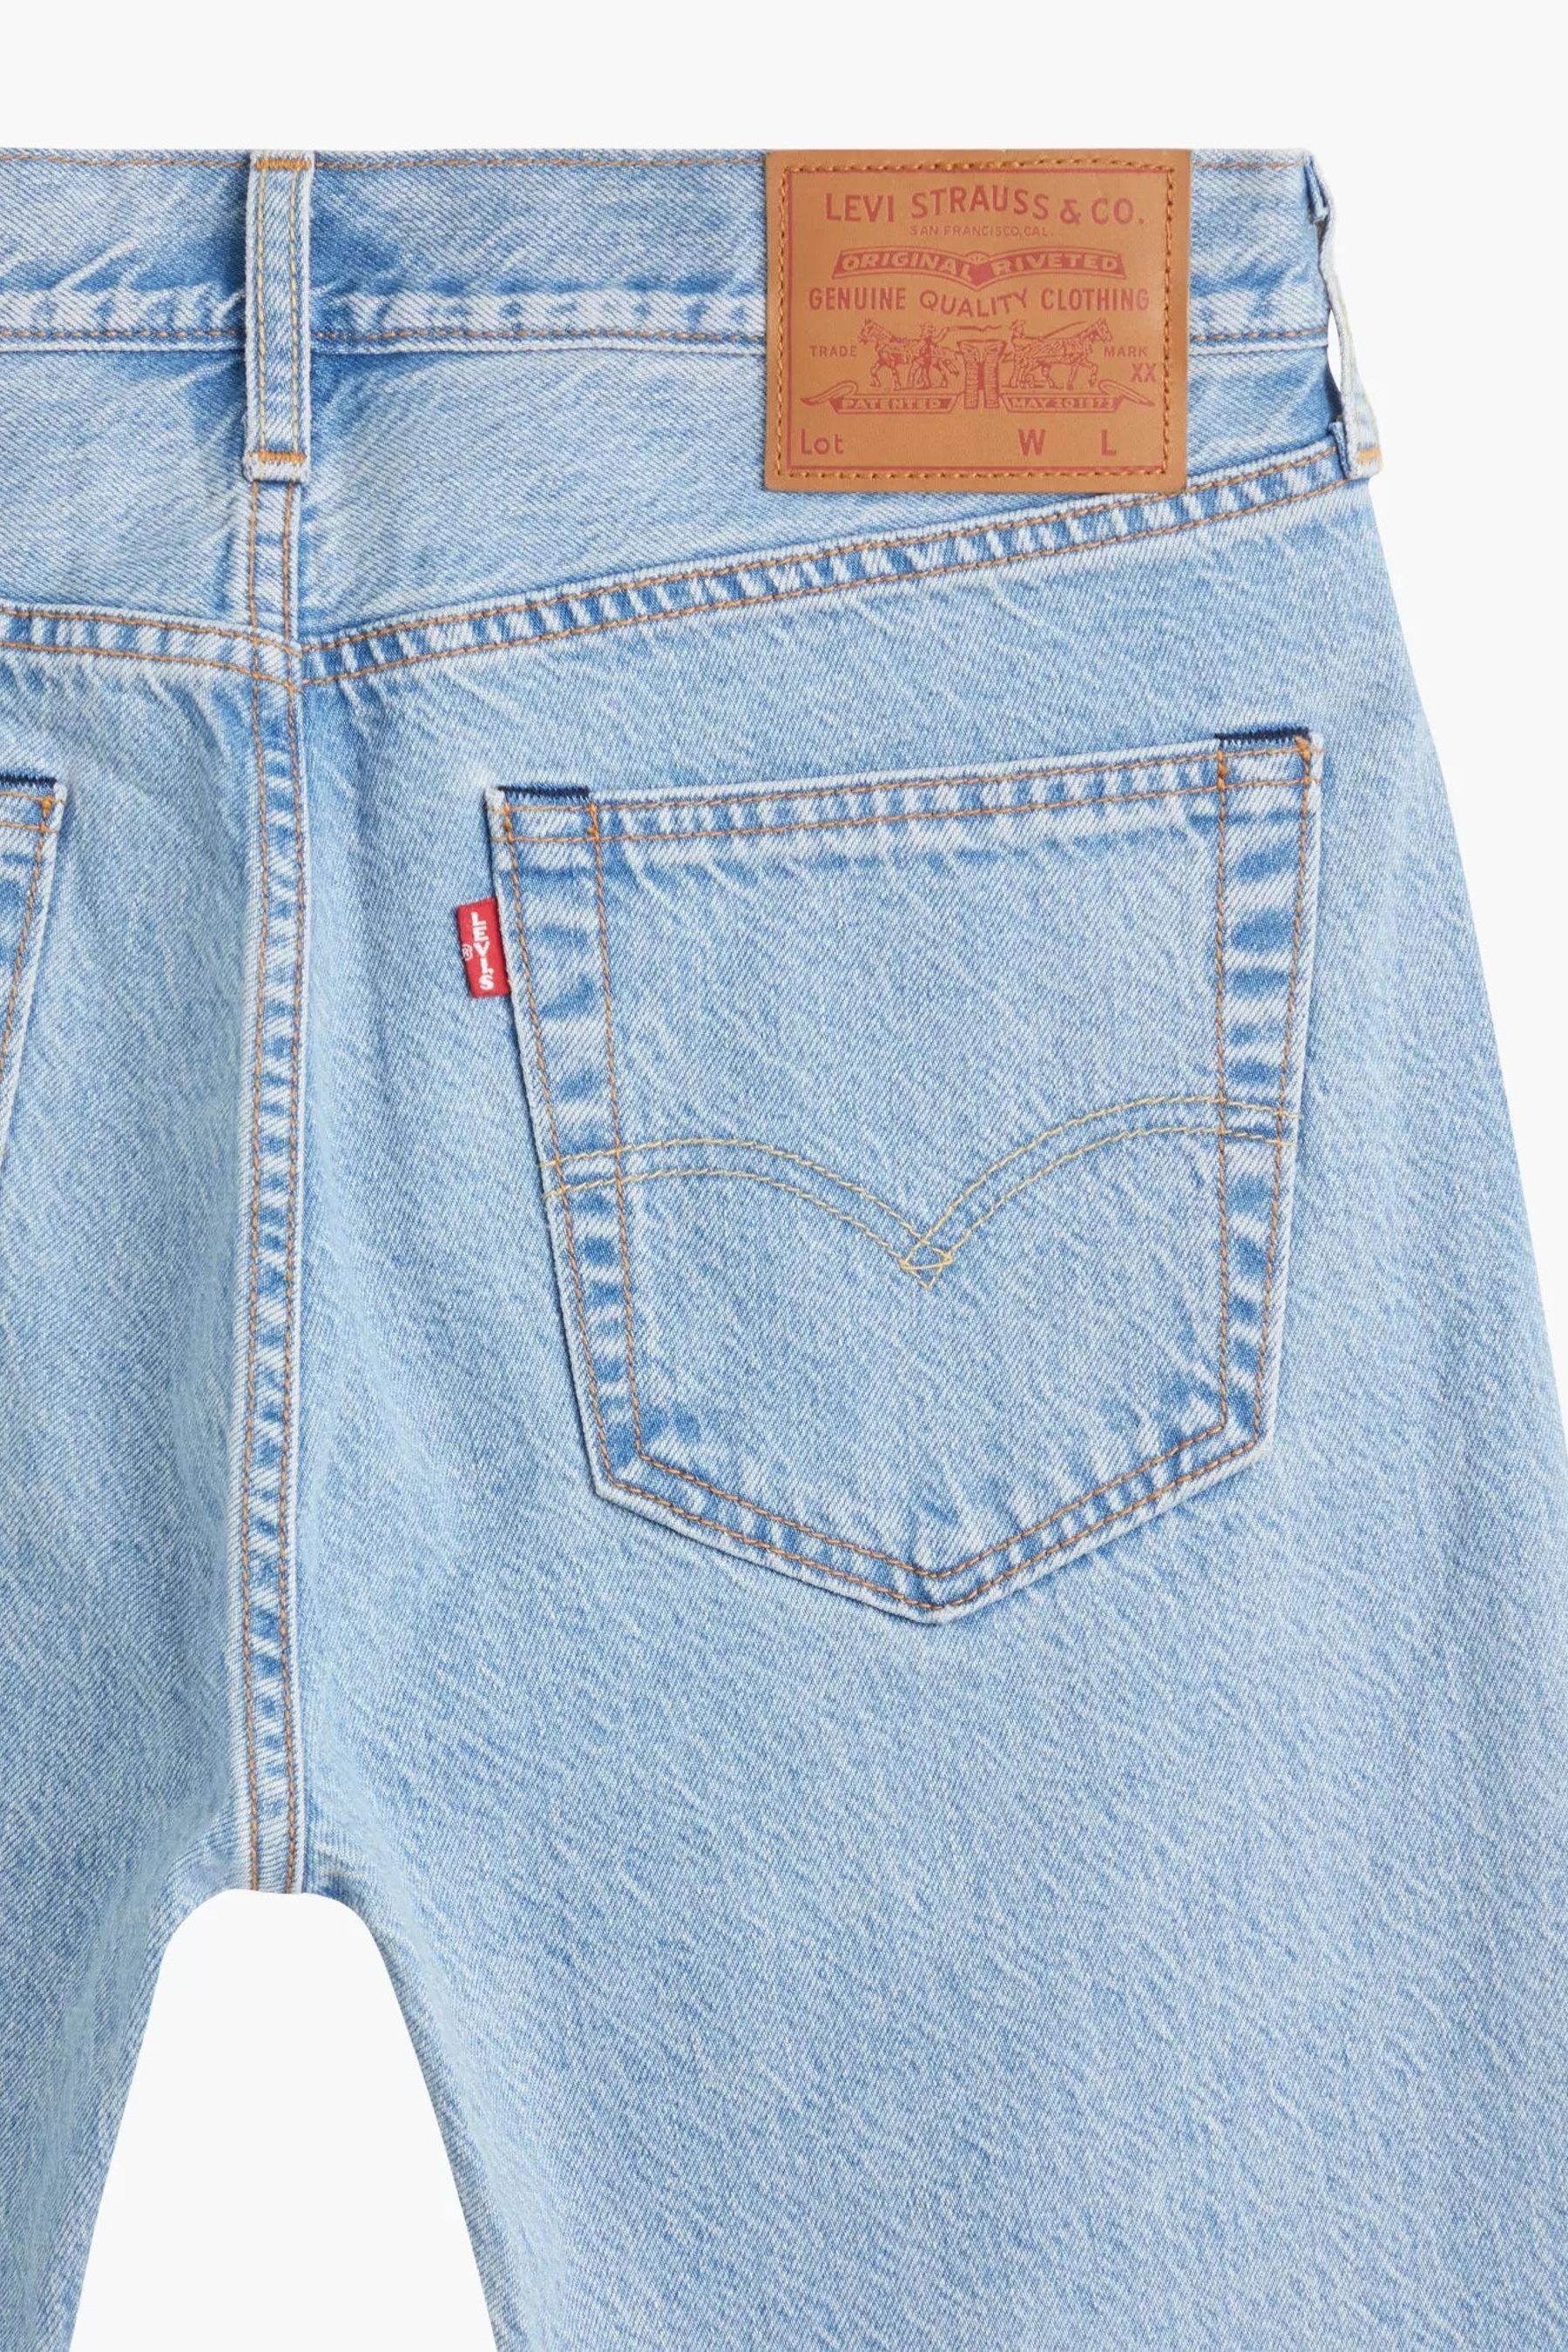 Buy Levi's® 501® Straight Fit Jeans from the Next UK online shop